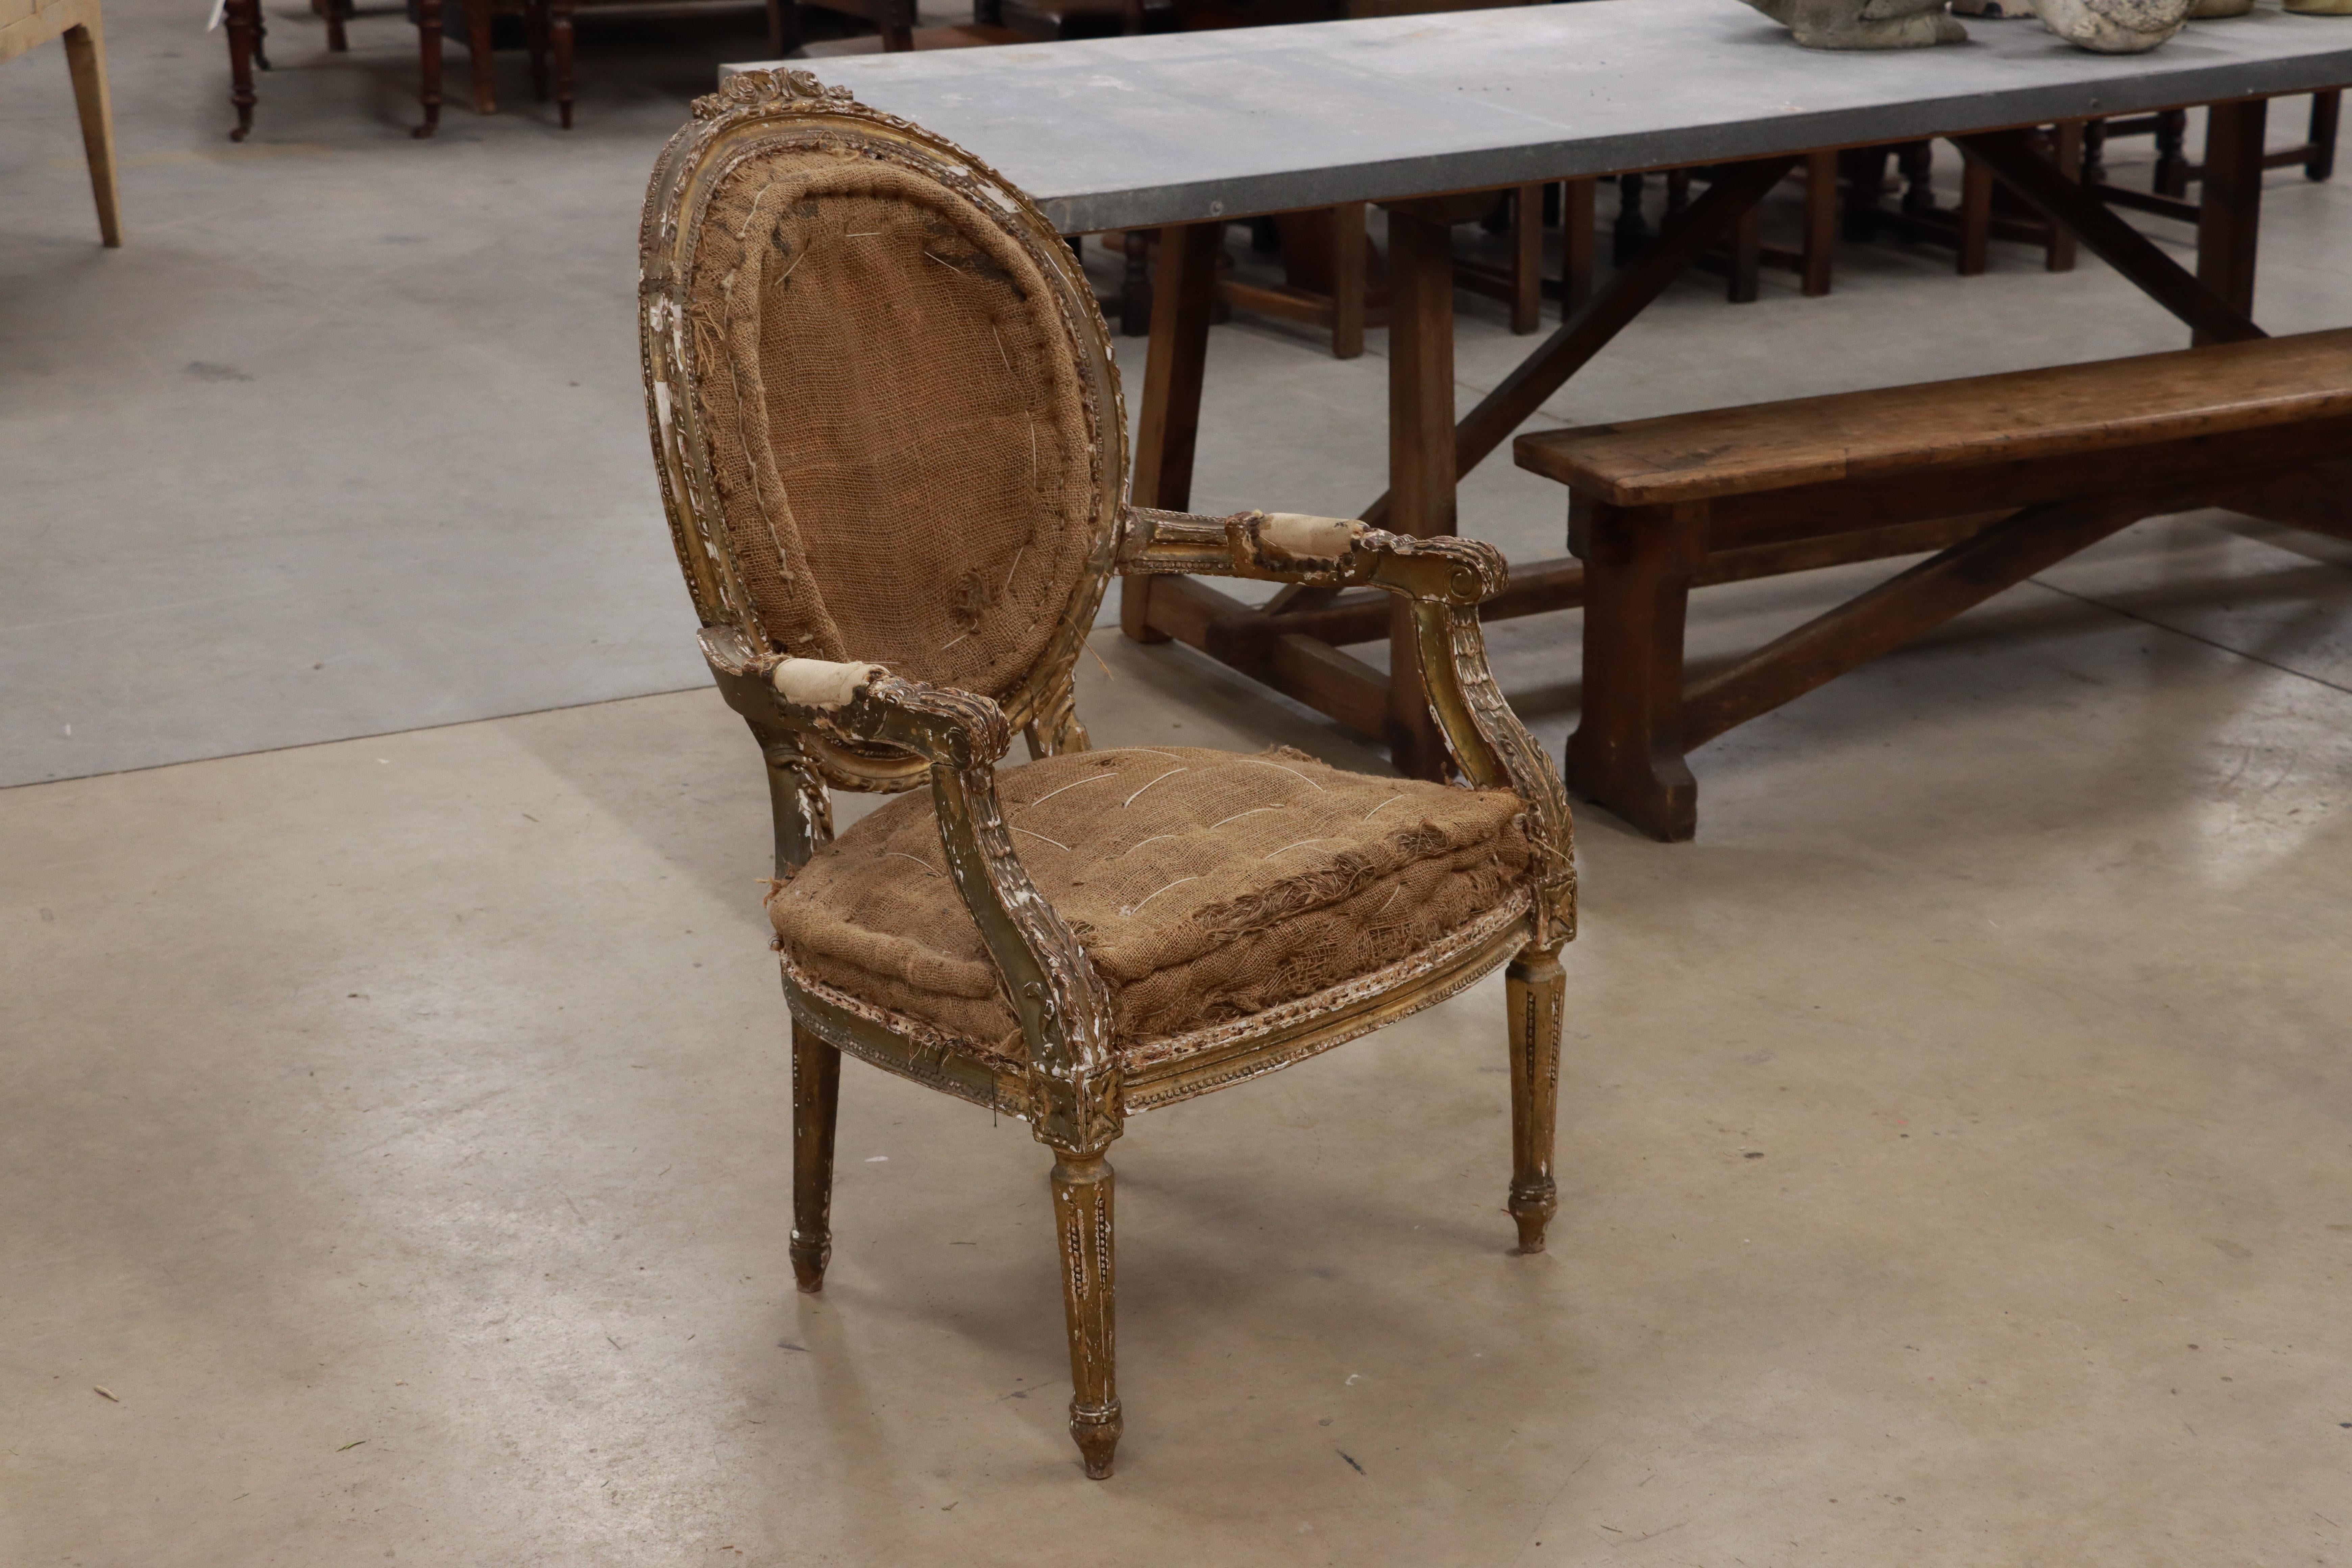 Late 18th century Louis VXI period French fauteuil chair. It has an oval cameo back with a cartouche to the top, with downnswept arms and fluted legs. It still has visible remnants of its original paint and gilt frame.

The chair would suit a 